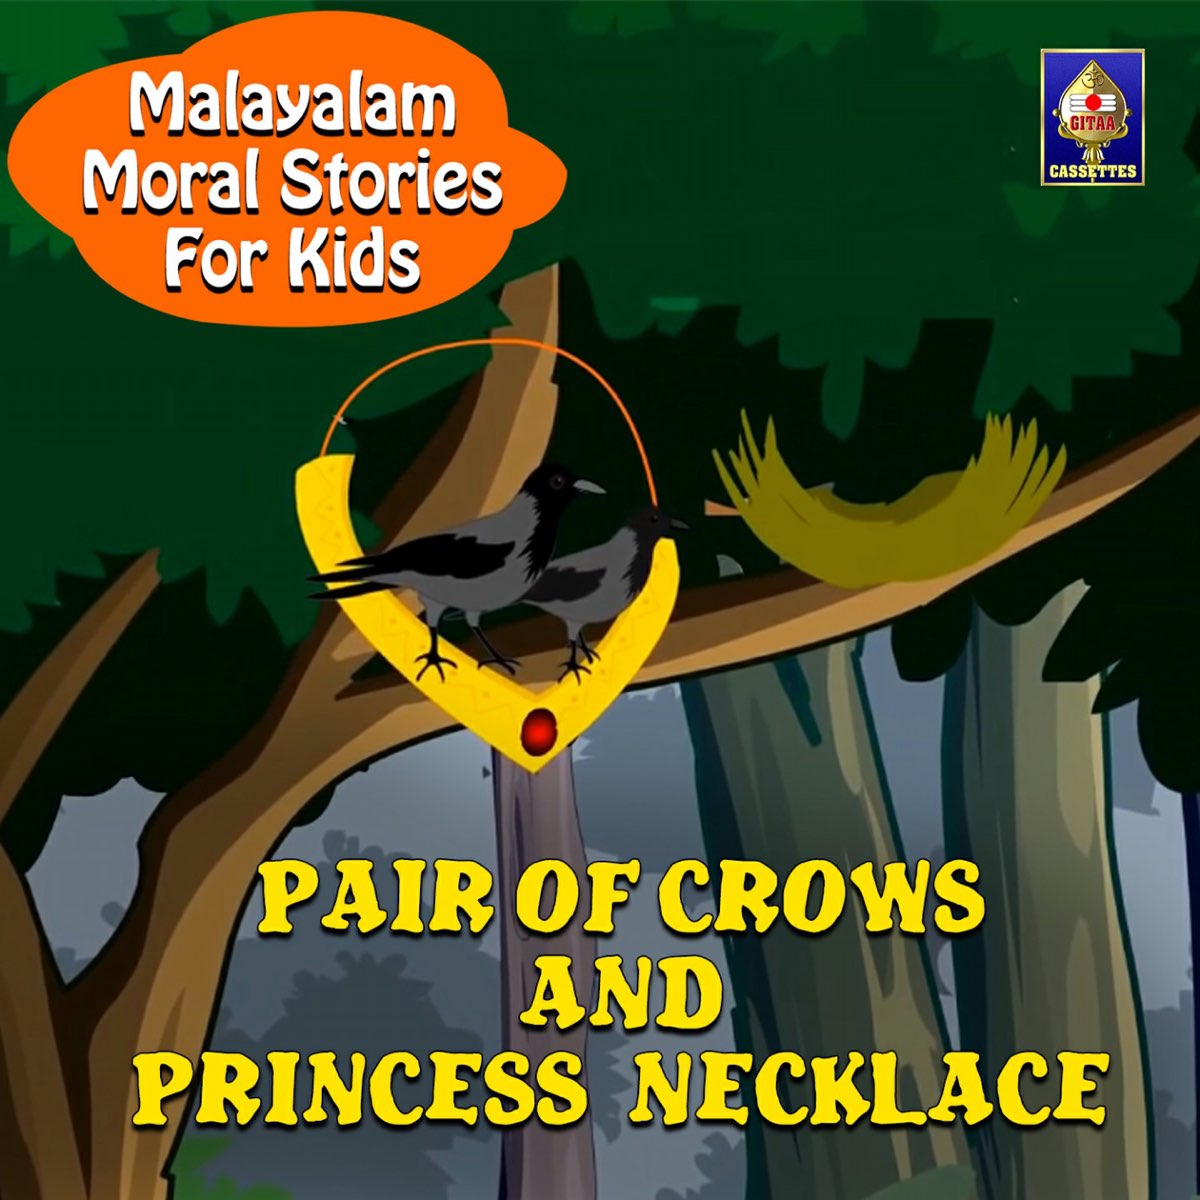 Malayalam Moral Stories For Kids - Pair of Crows and Princess Necklace -  Single by Karthika on Apple Music